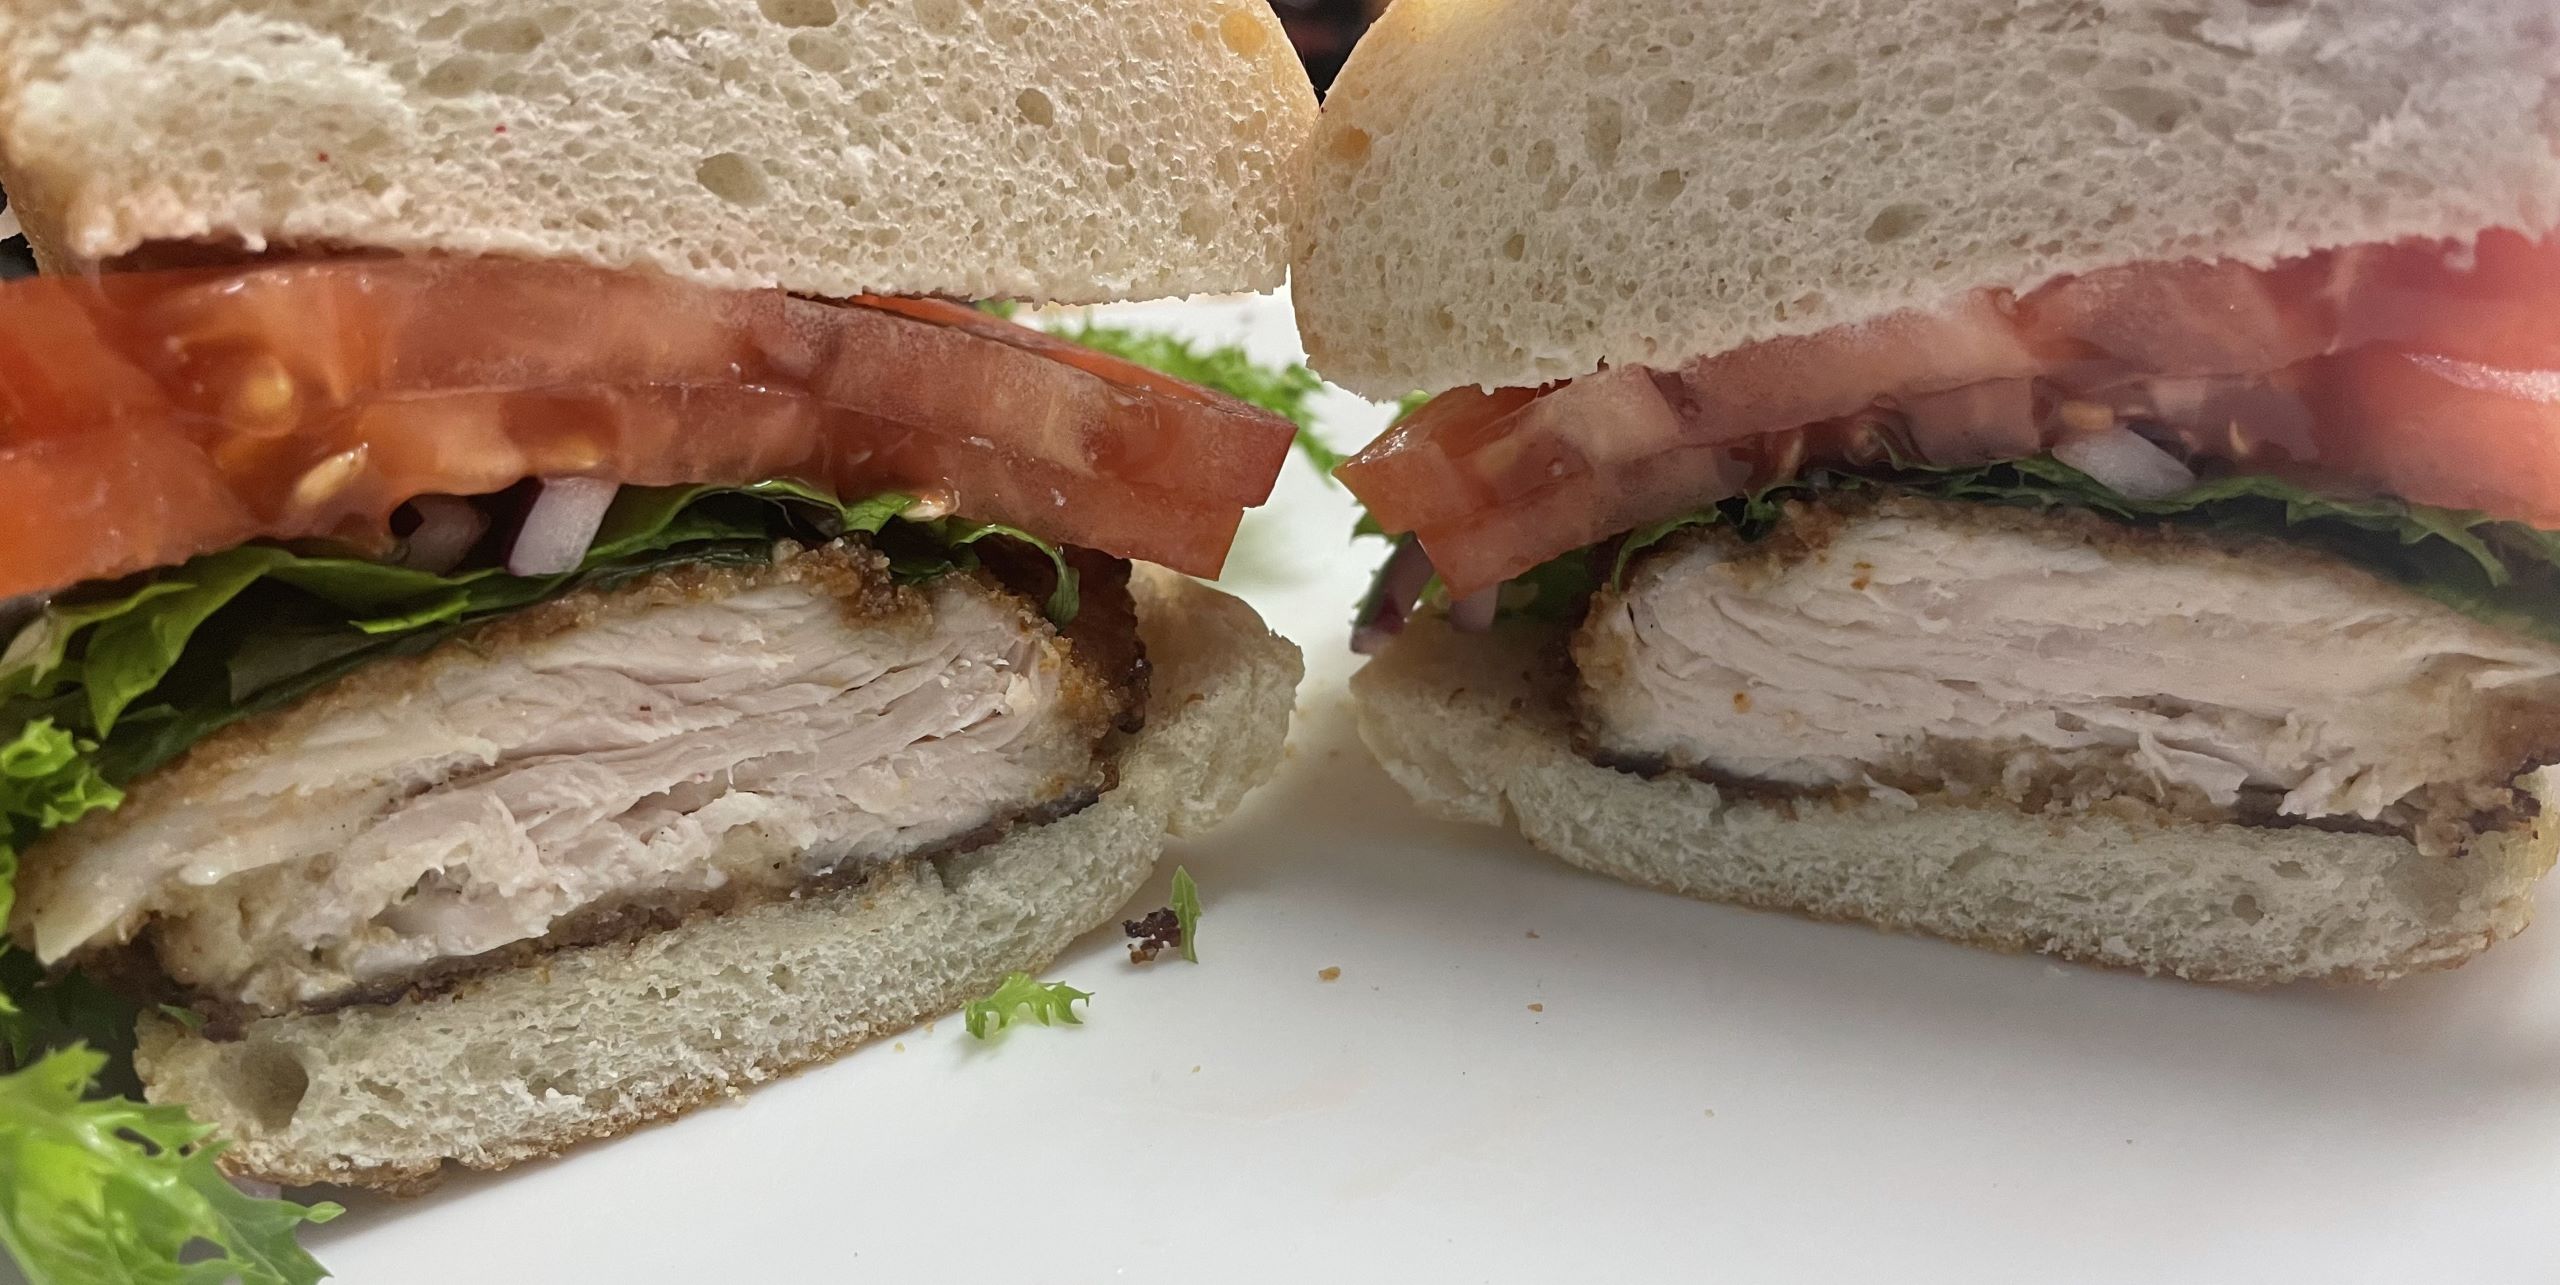 Kat's Chicken Cutlet Hoagie cut in half showing both halves having tender natural free-range chicken breaded with generous slices of tomato, lettuce and red onion on white submarine bread, served on a white plate.